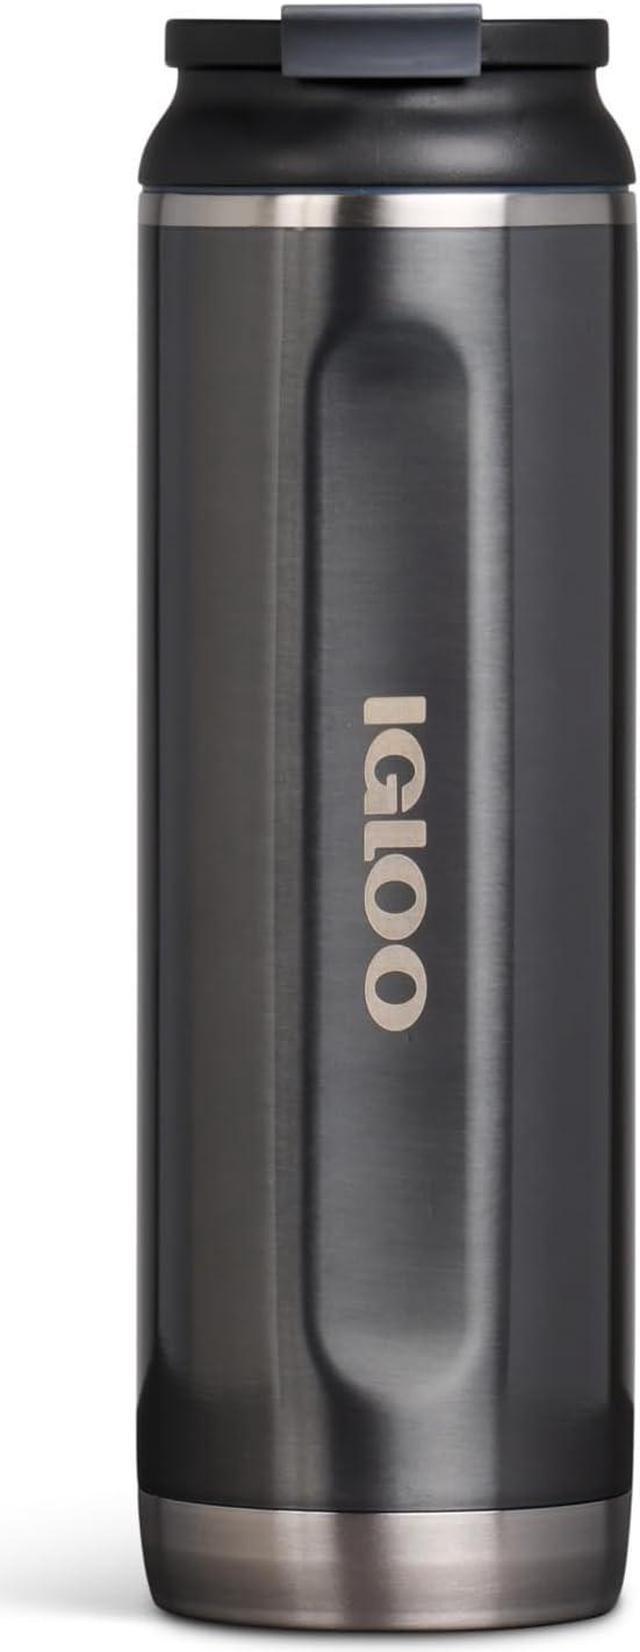 Igloo Launches Stainless Steel Drinkware Collection